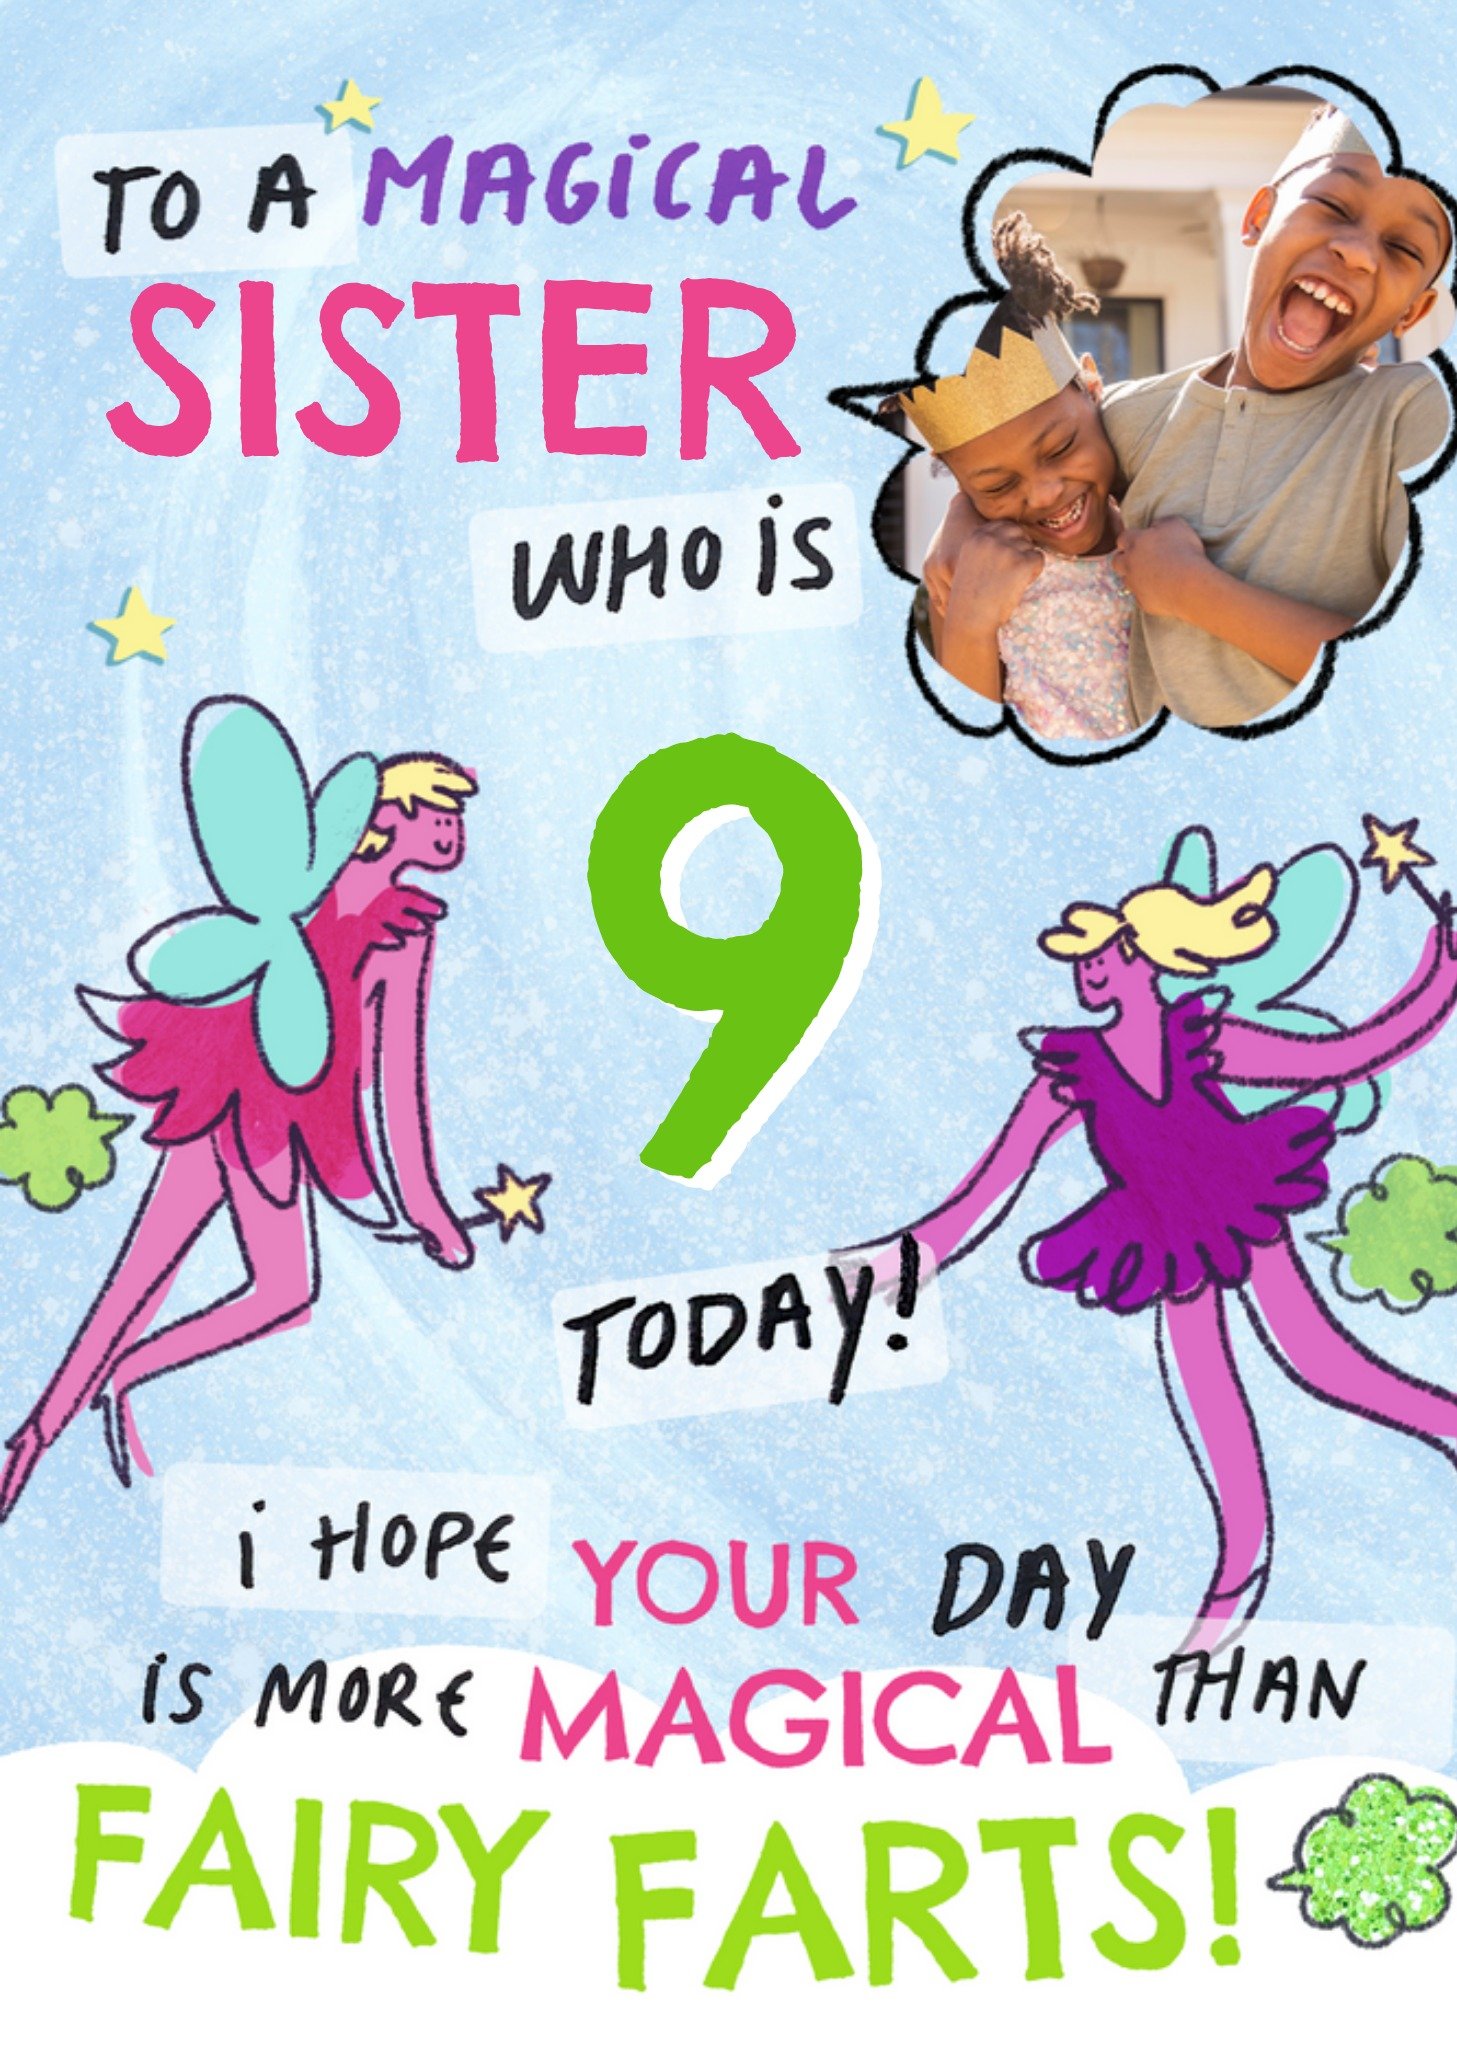 Moonpig Gross To A Magical Sister 9 Today Fairy Farts Illustrated Fairies Birthday Card, Large